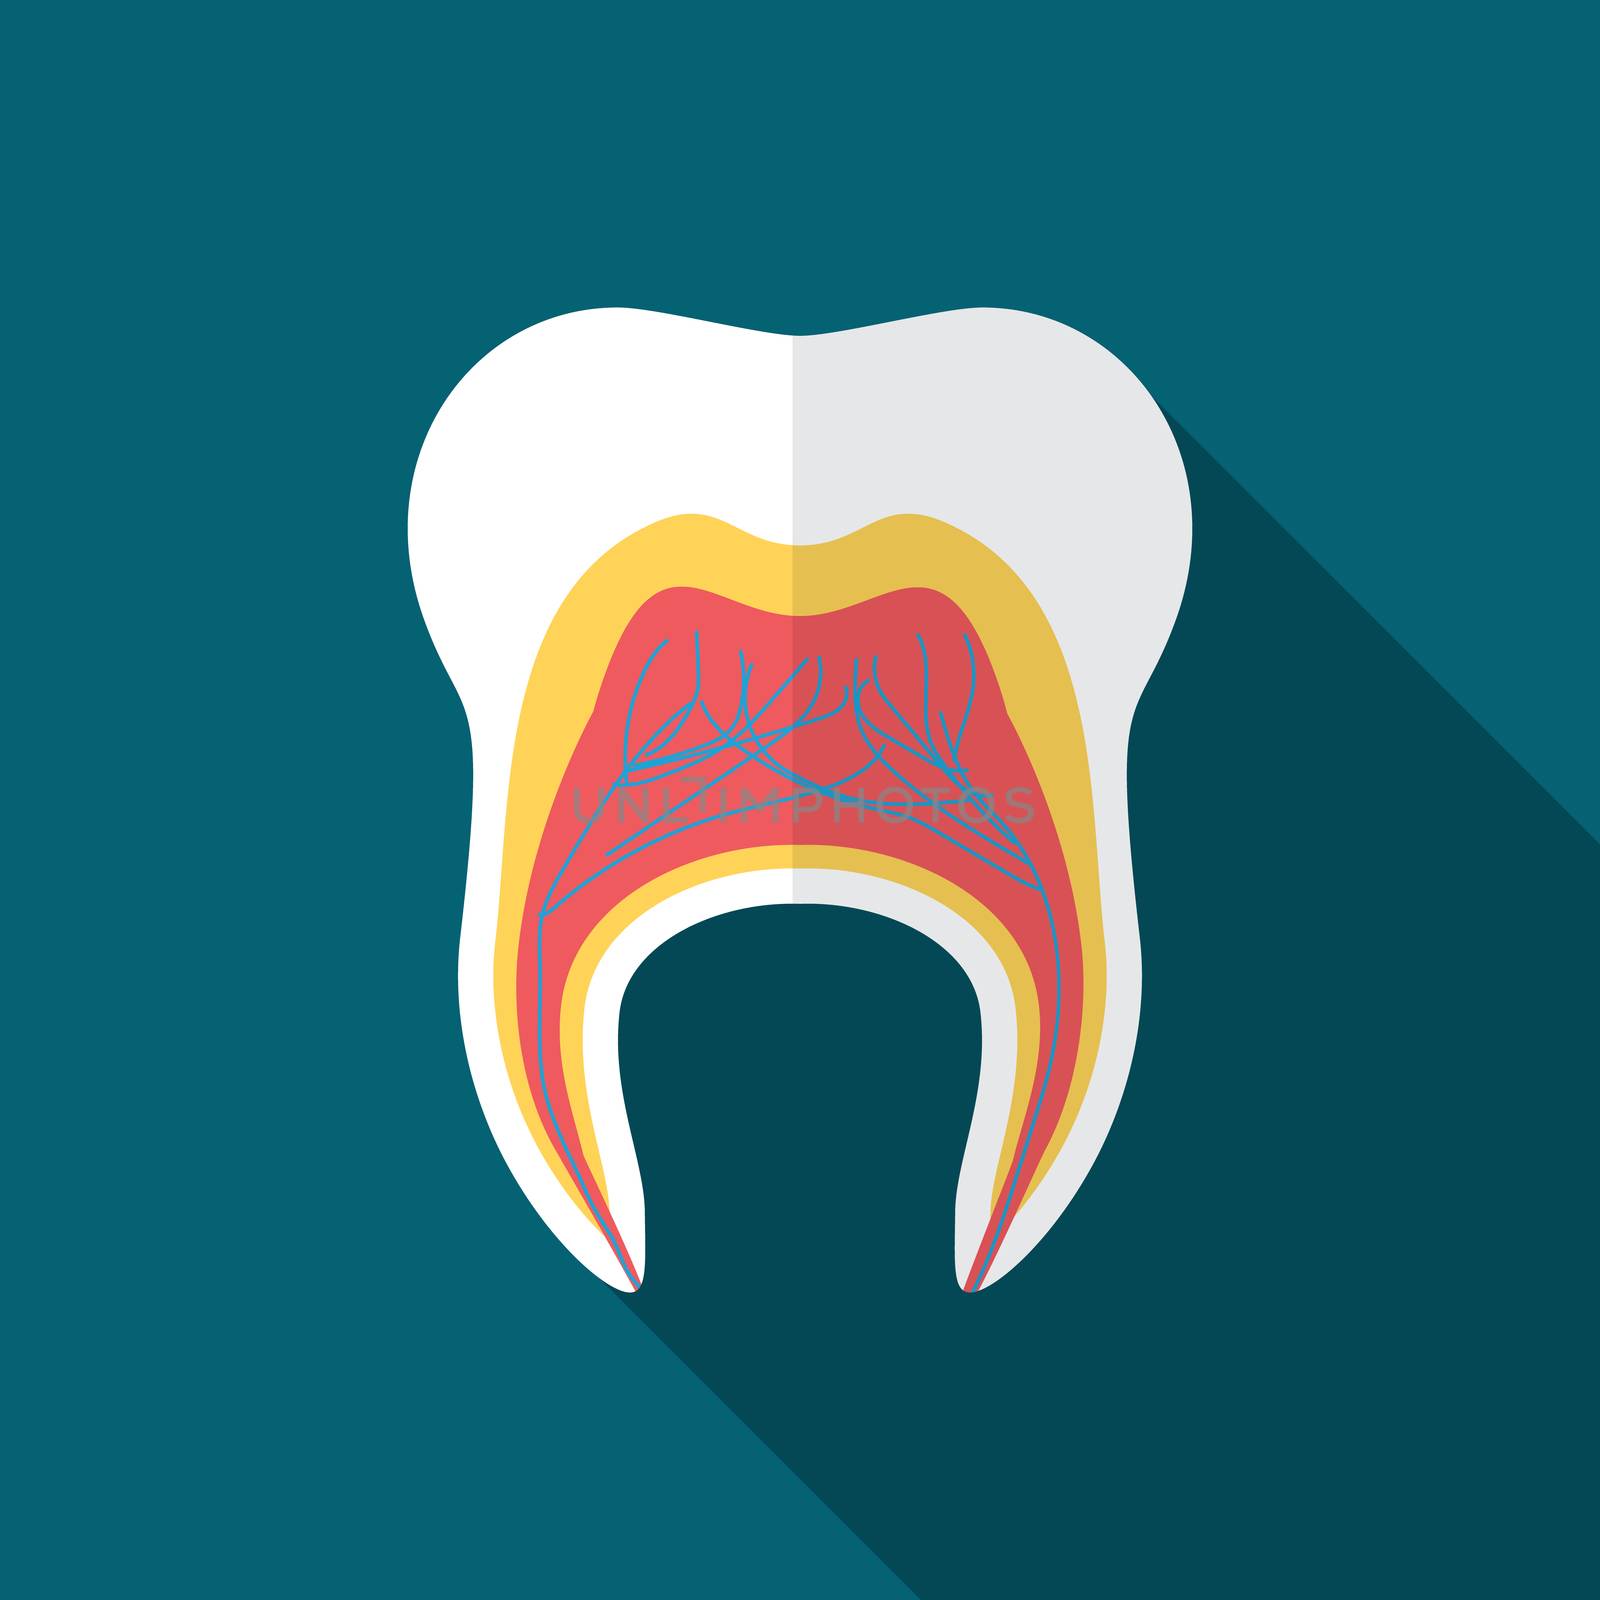 Flat design modern vector illustration of tooth icon with long shadow by Lemon_workshop